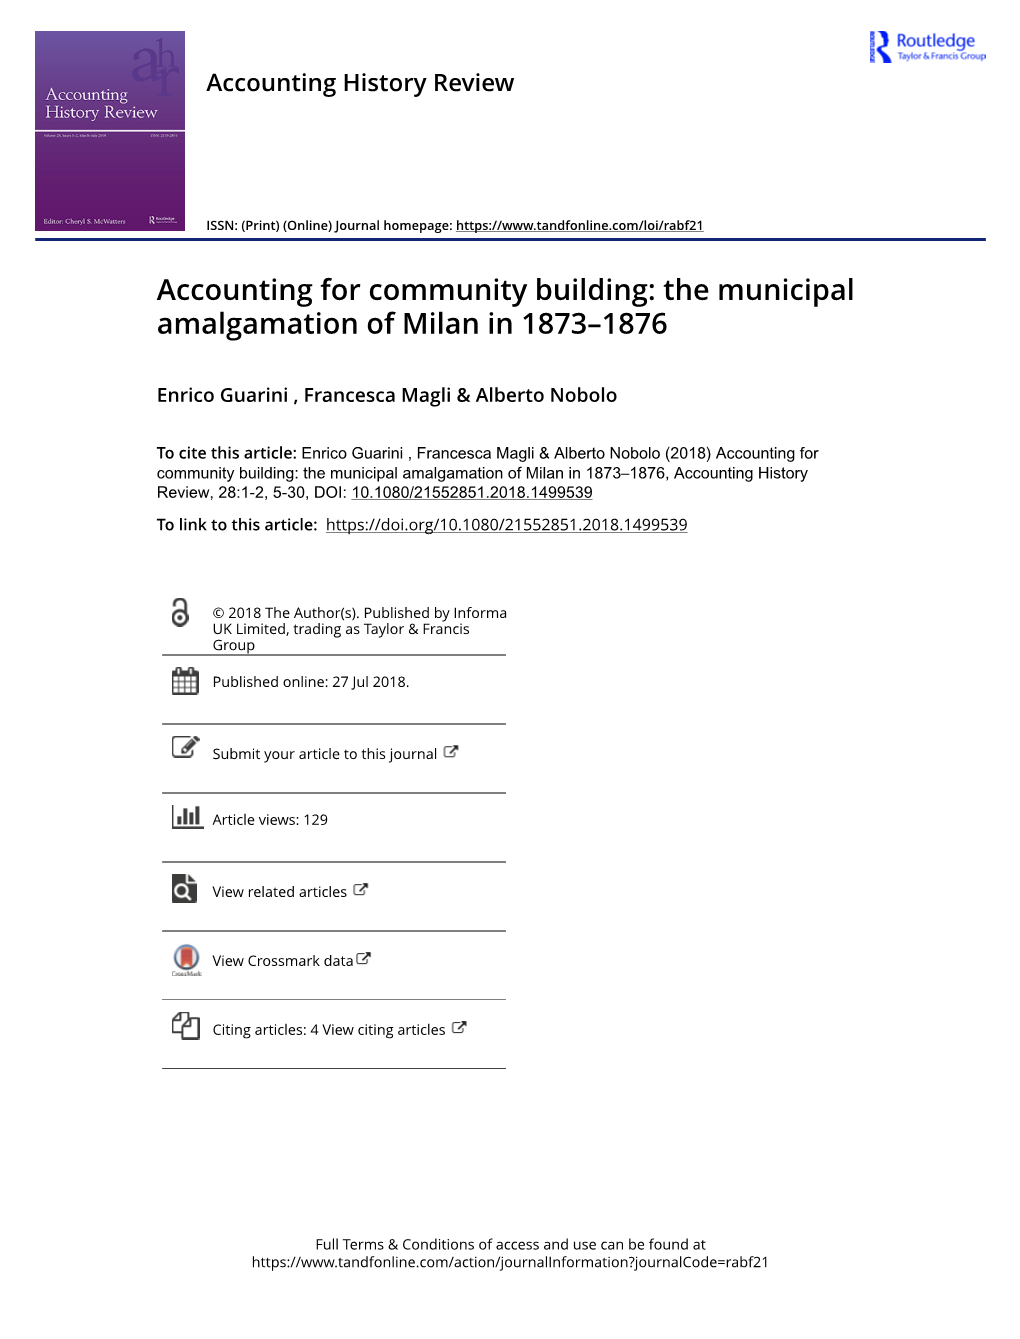 Accounting for Community Building: the Municipal Amalgamation of Milan in 1873–1876